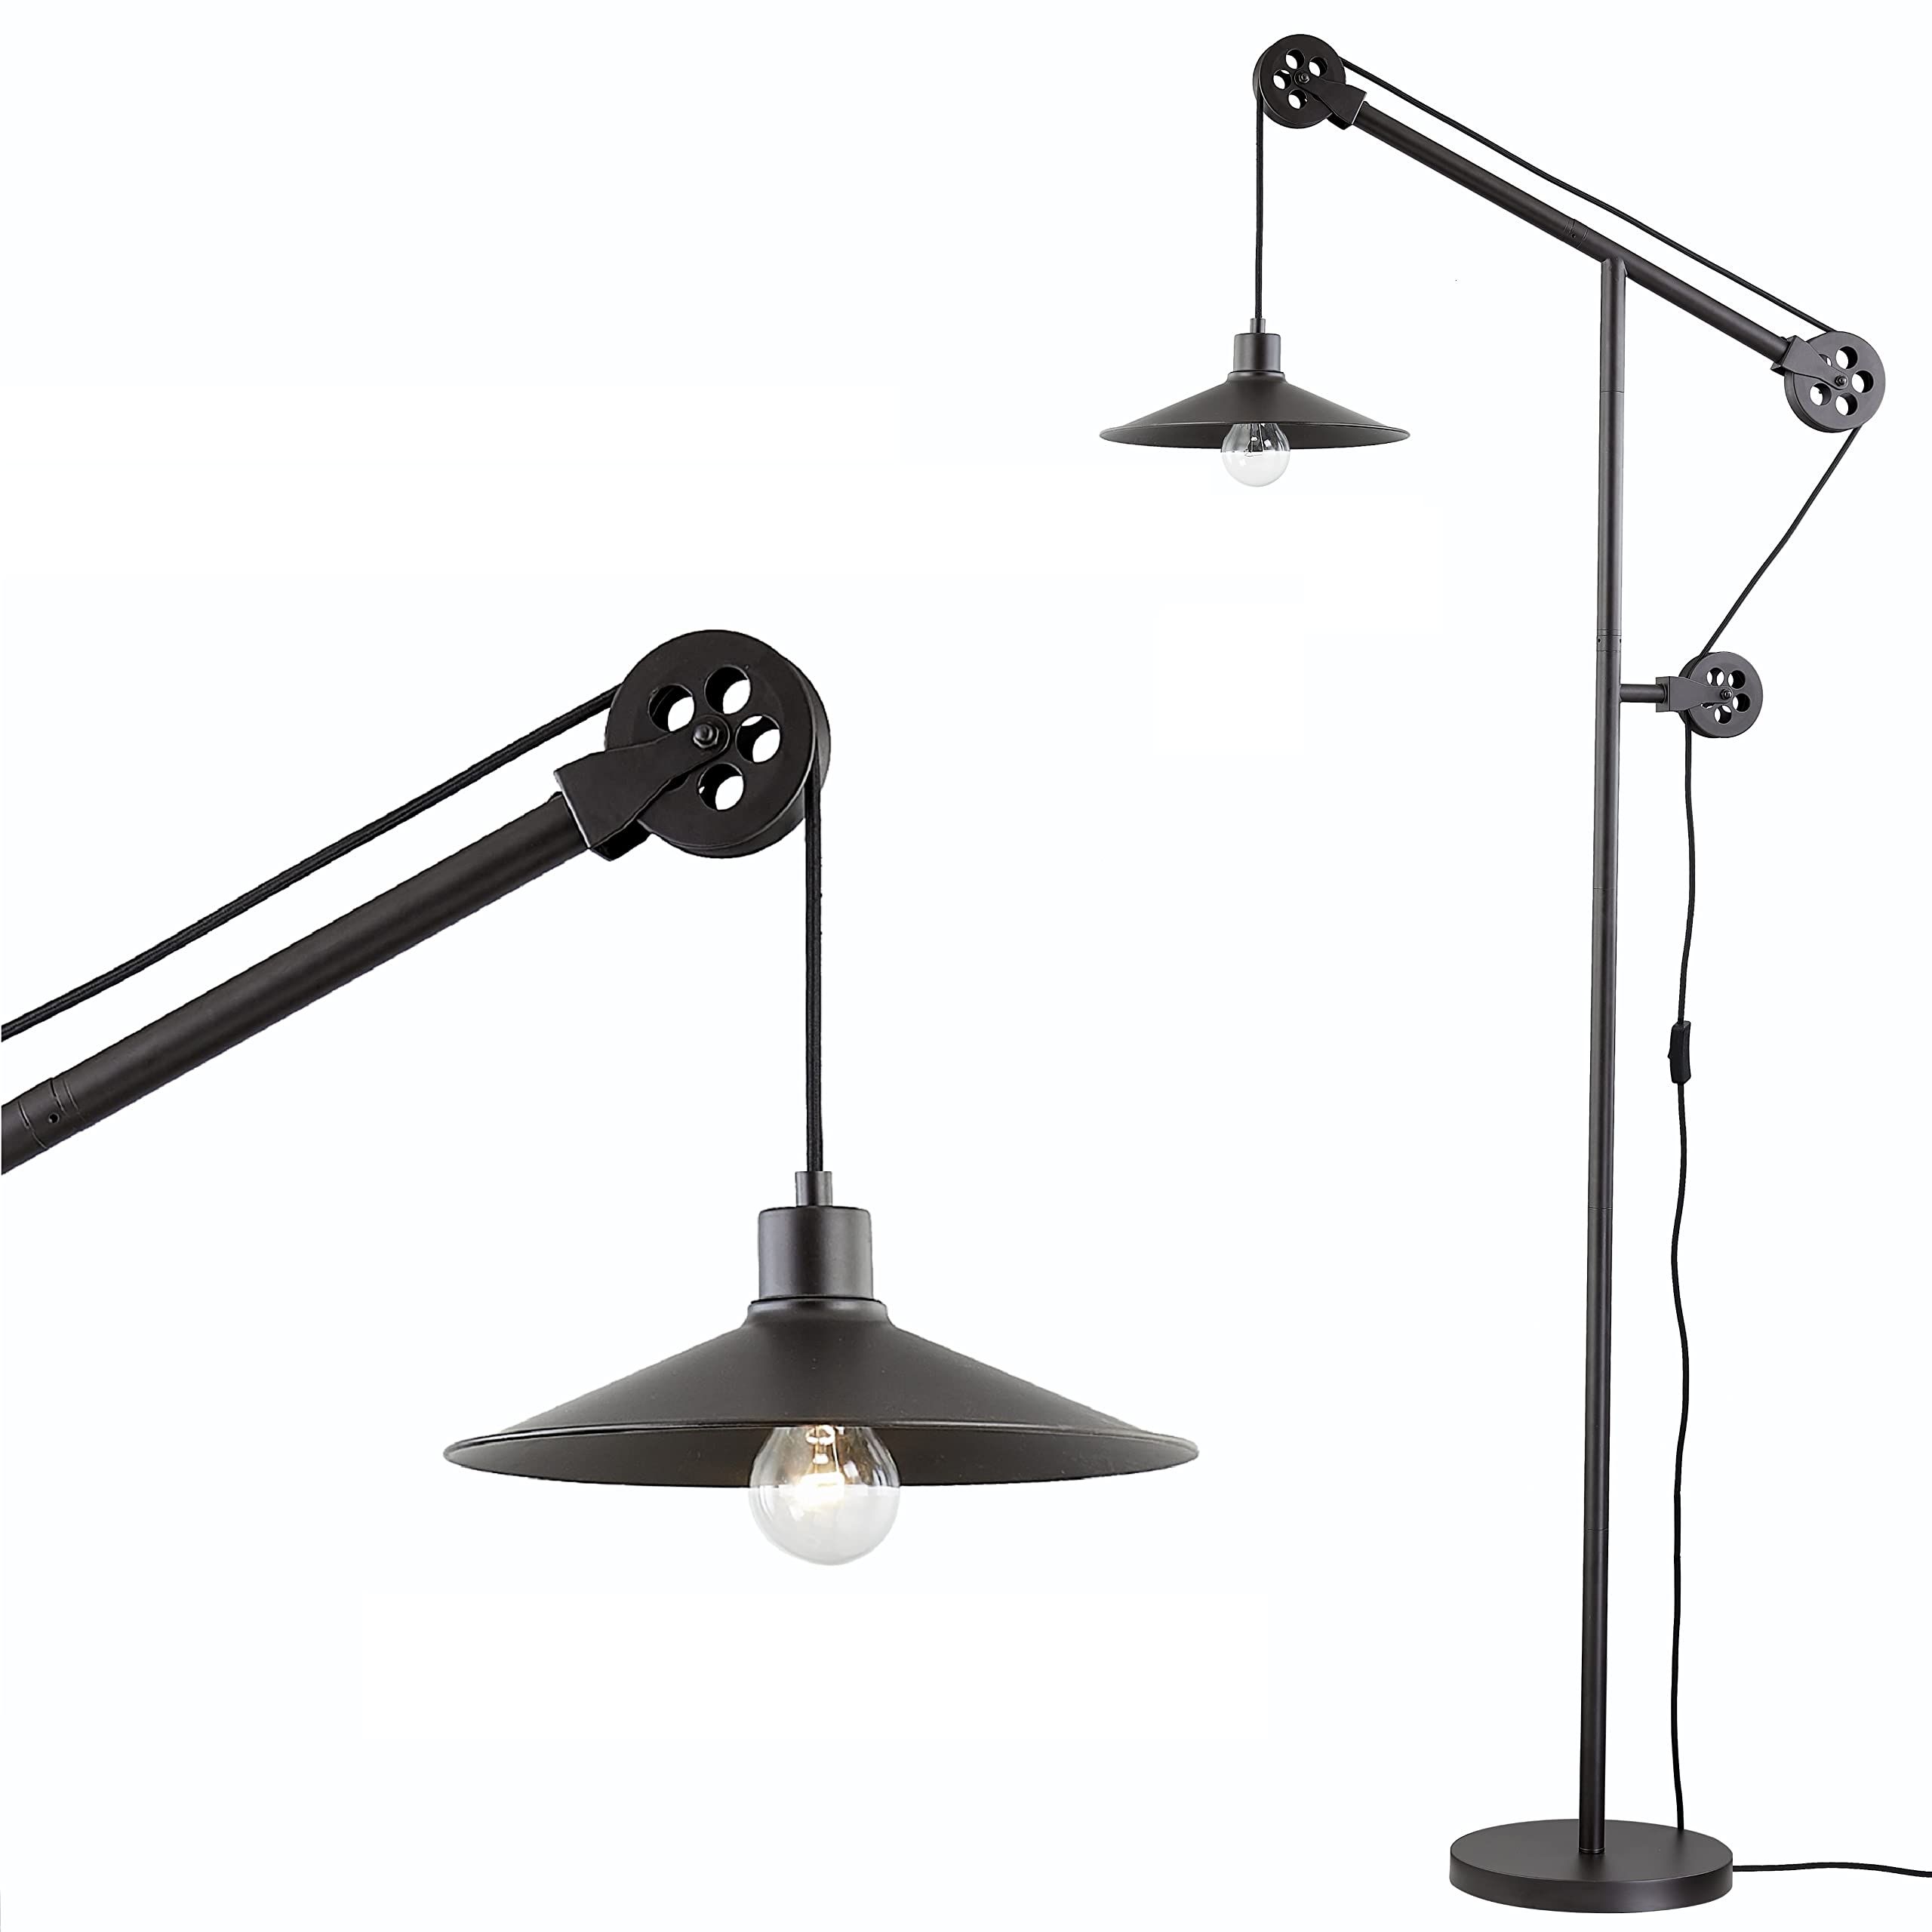 Fashionable Pulley System Floor Lamp With Metal Shade, Adjustable Industrial Floor Lamps  For Living Room Rustic Modern Farmhouse Task Lamp, Vintage Tall Standing  Lamp For Bedroom Office,70 Inch Blackened Bronze – – Amazon Within 70 Inch Standing Lamps (View 9 of 15)